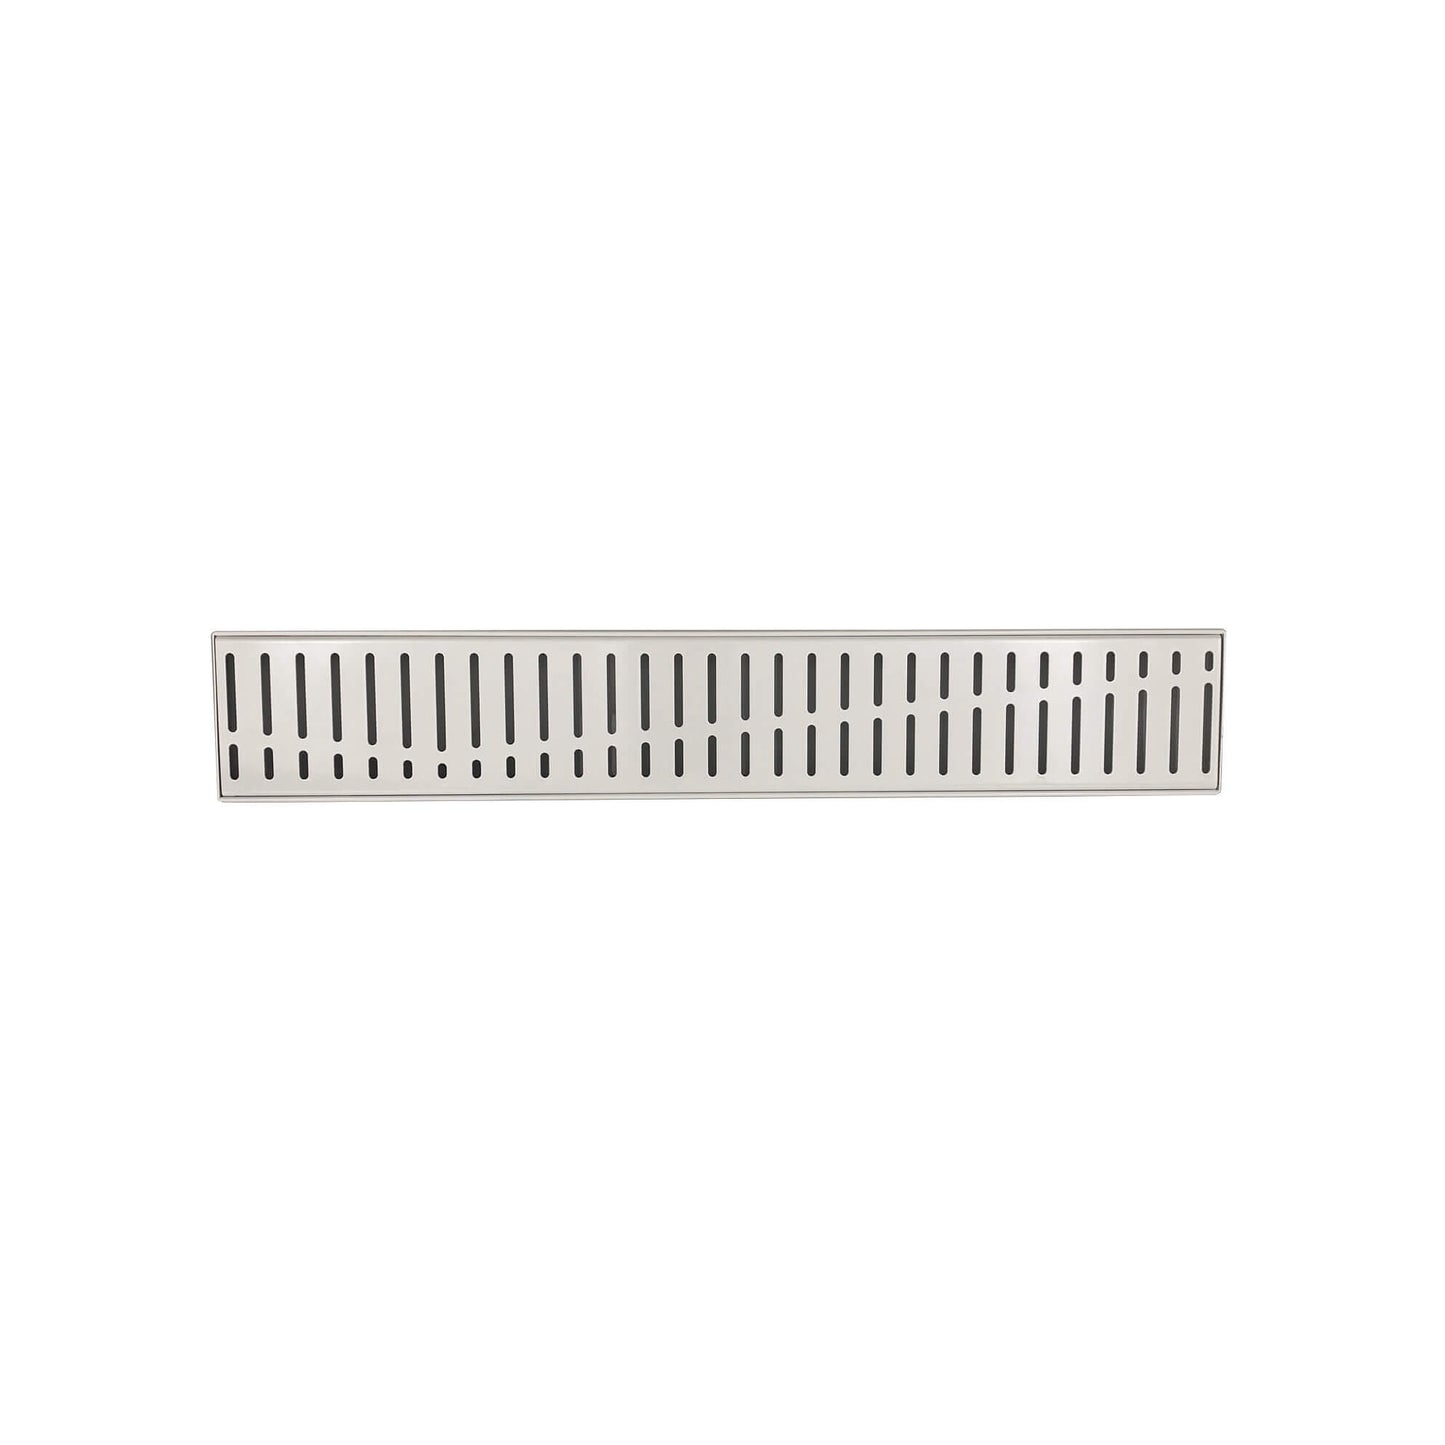 Flow Pattern Grate and Channel Drain - White